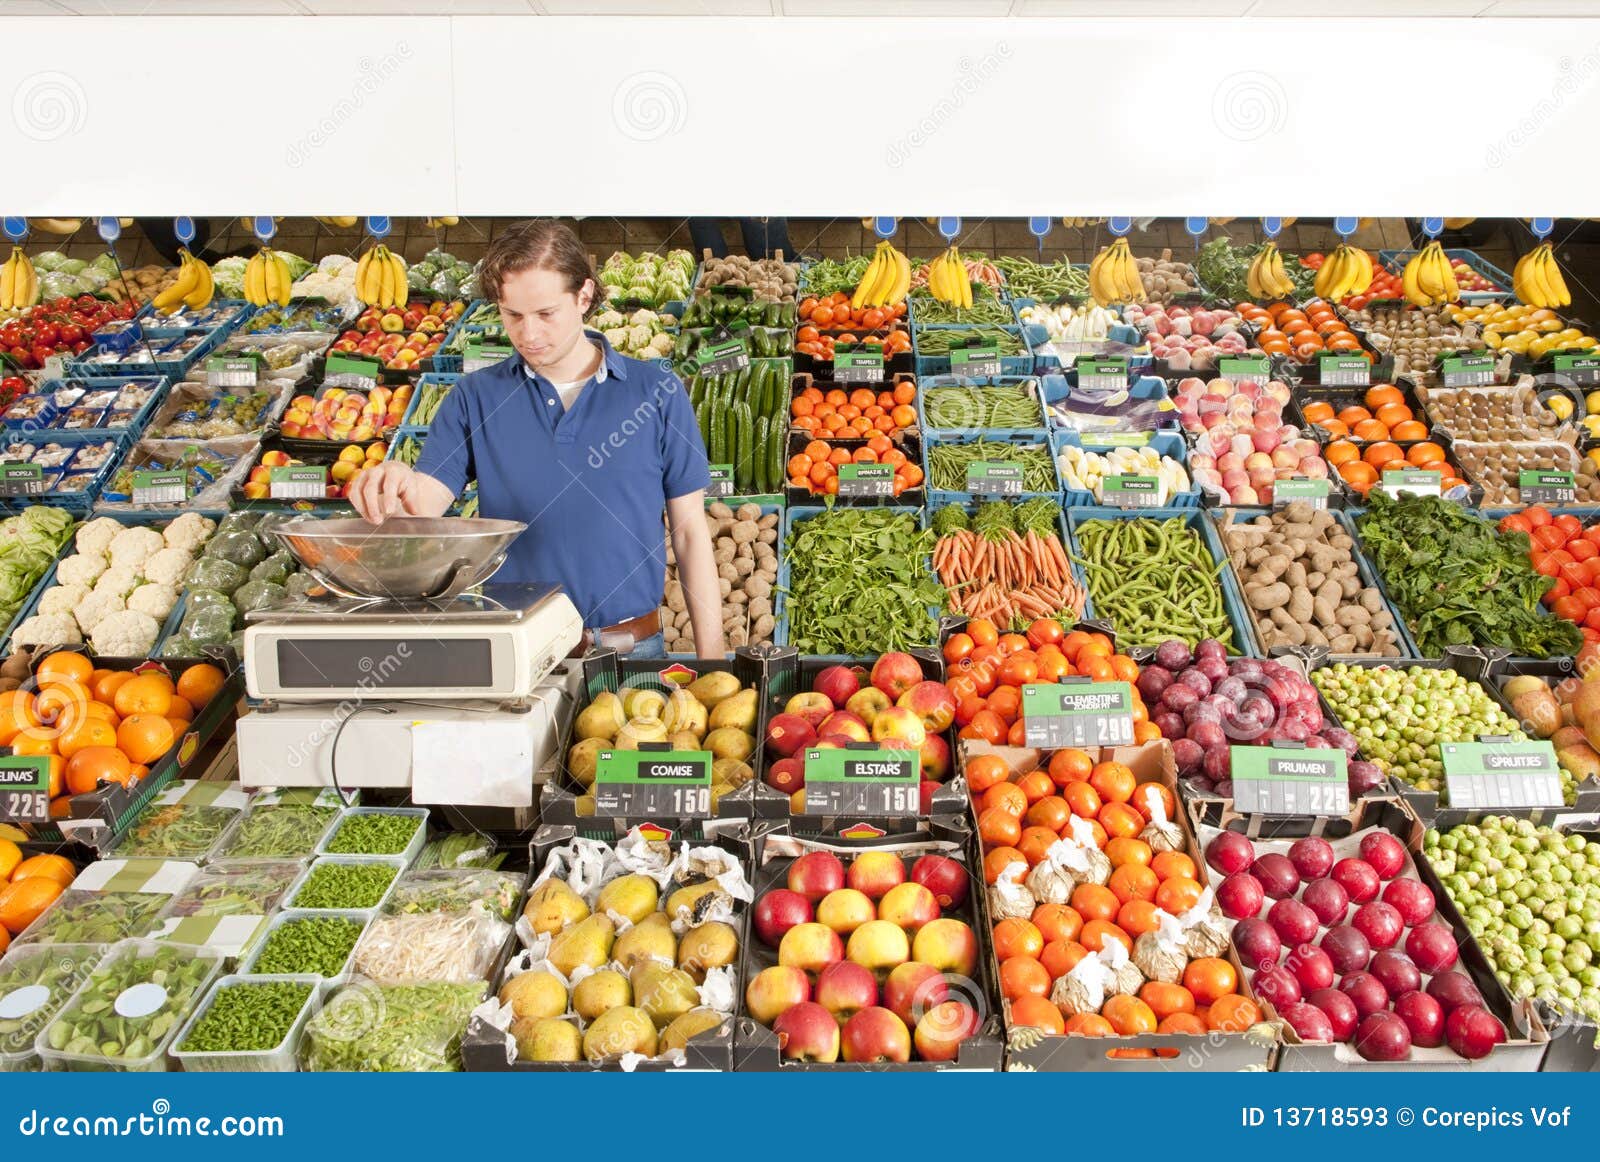 greengrocer clipart - photo #26